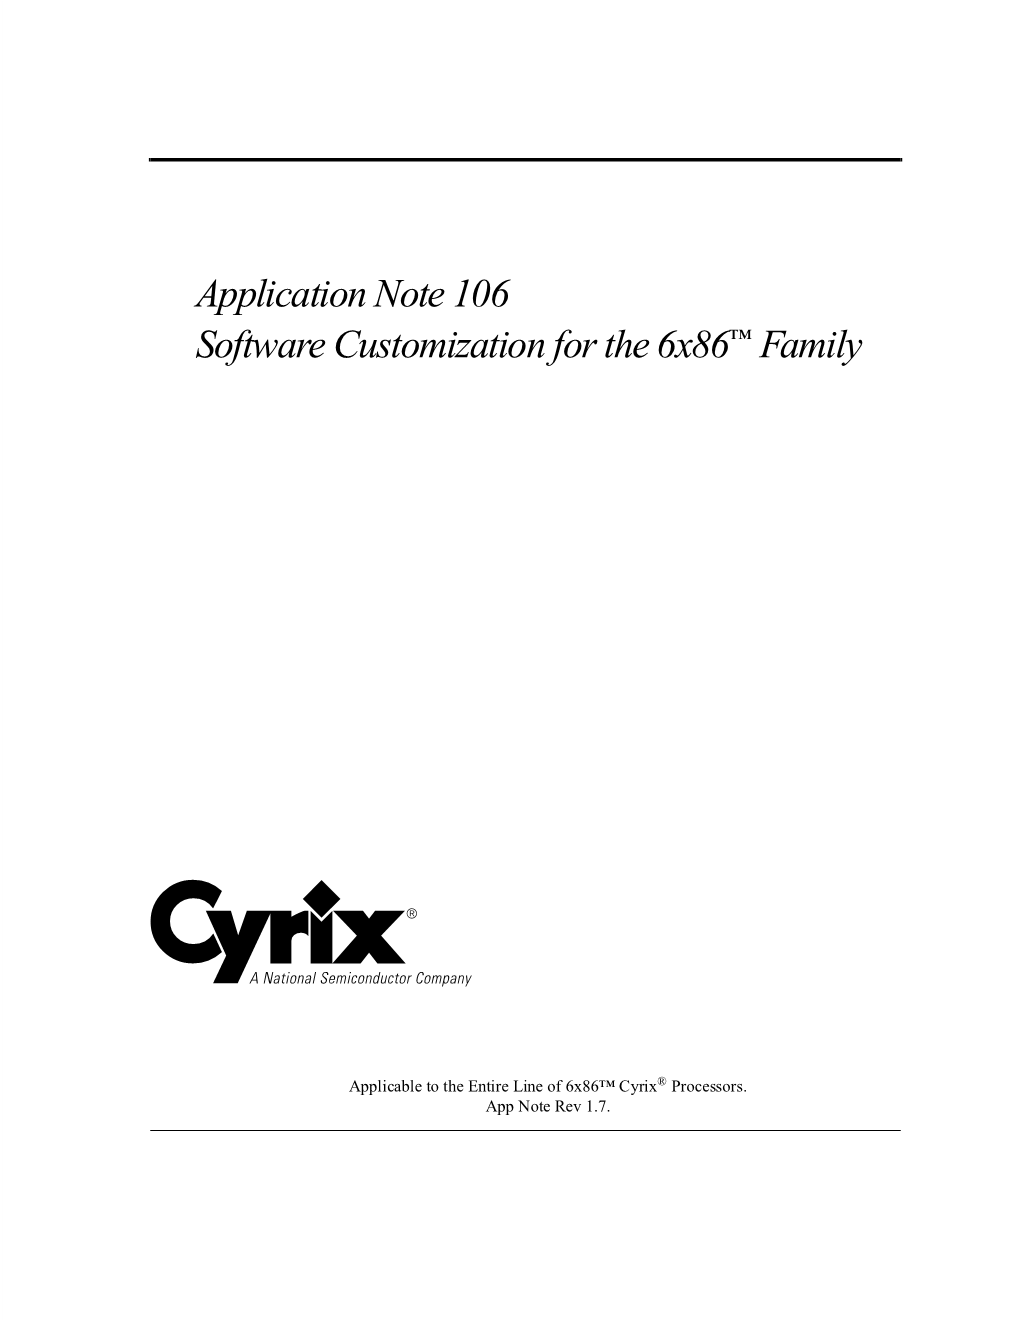 Application Note 106 Software Customization for the 6X86™ Family